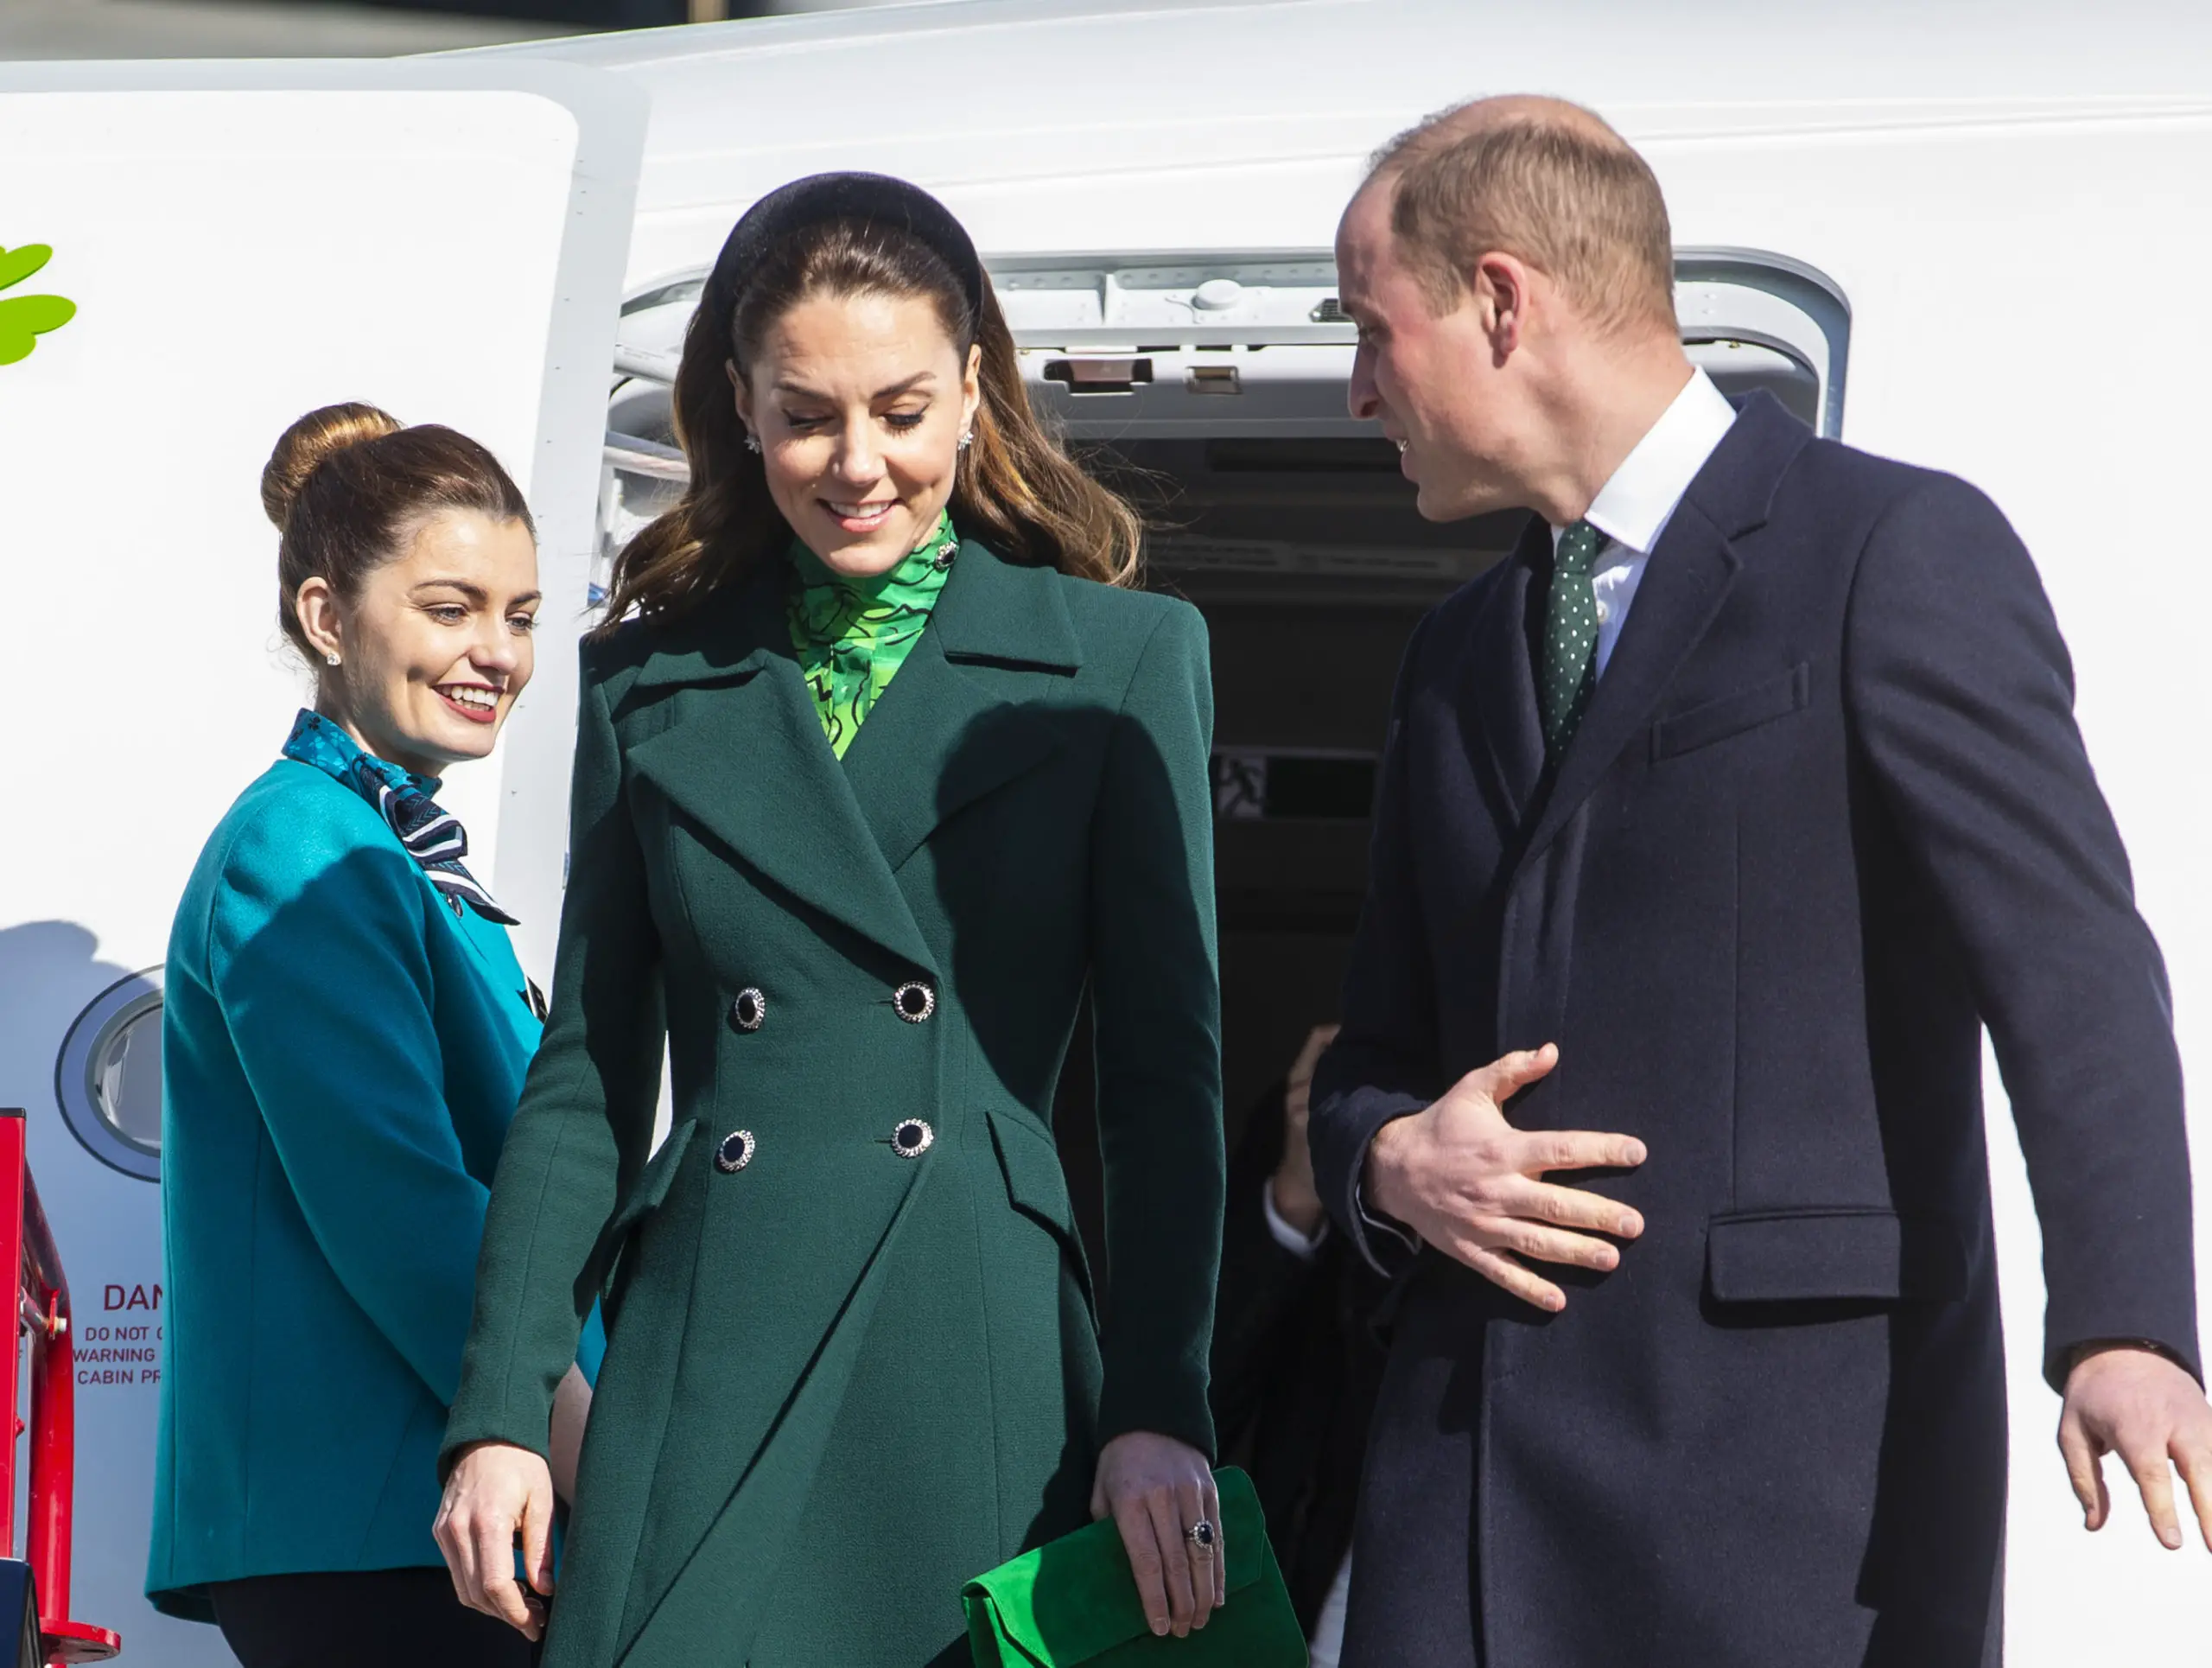 The Duke and Duchess of Cambridge walk down the steps of the plane as they arrive at Dublin International Airport ahead of their three day visit to the Republic of Ireland.